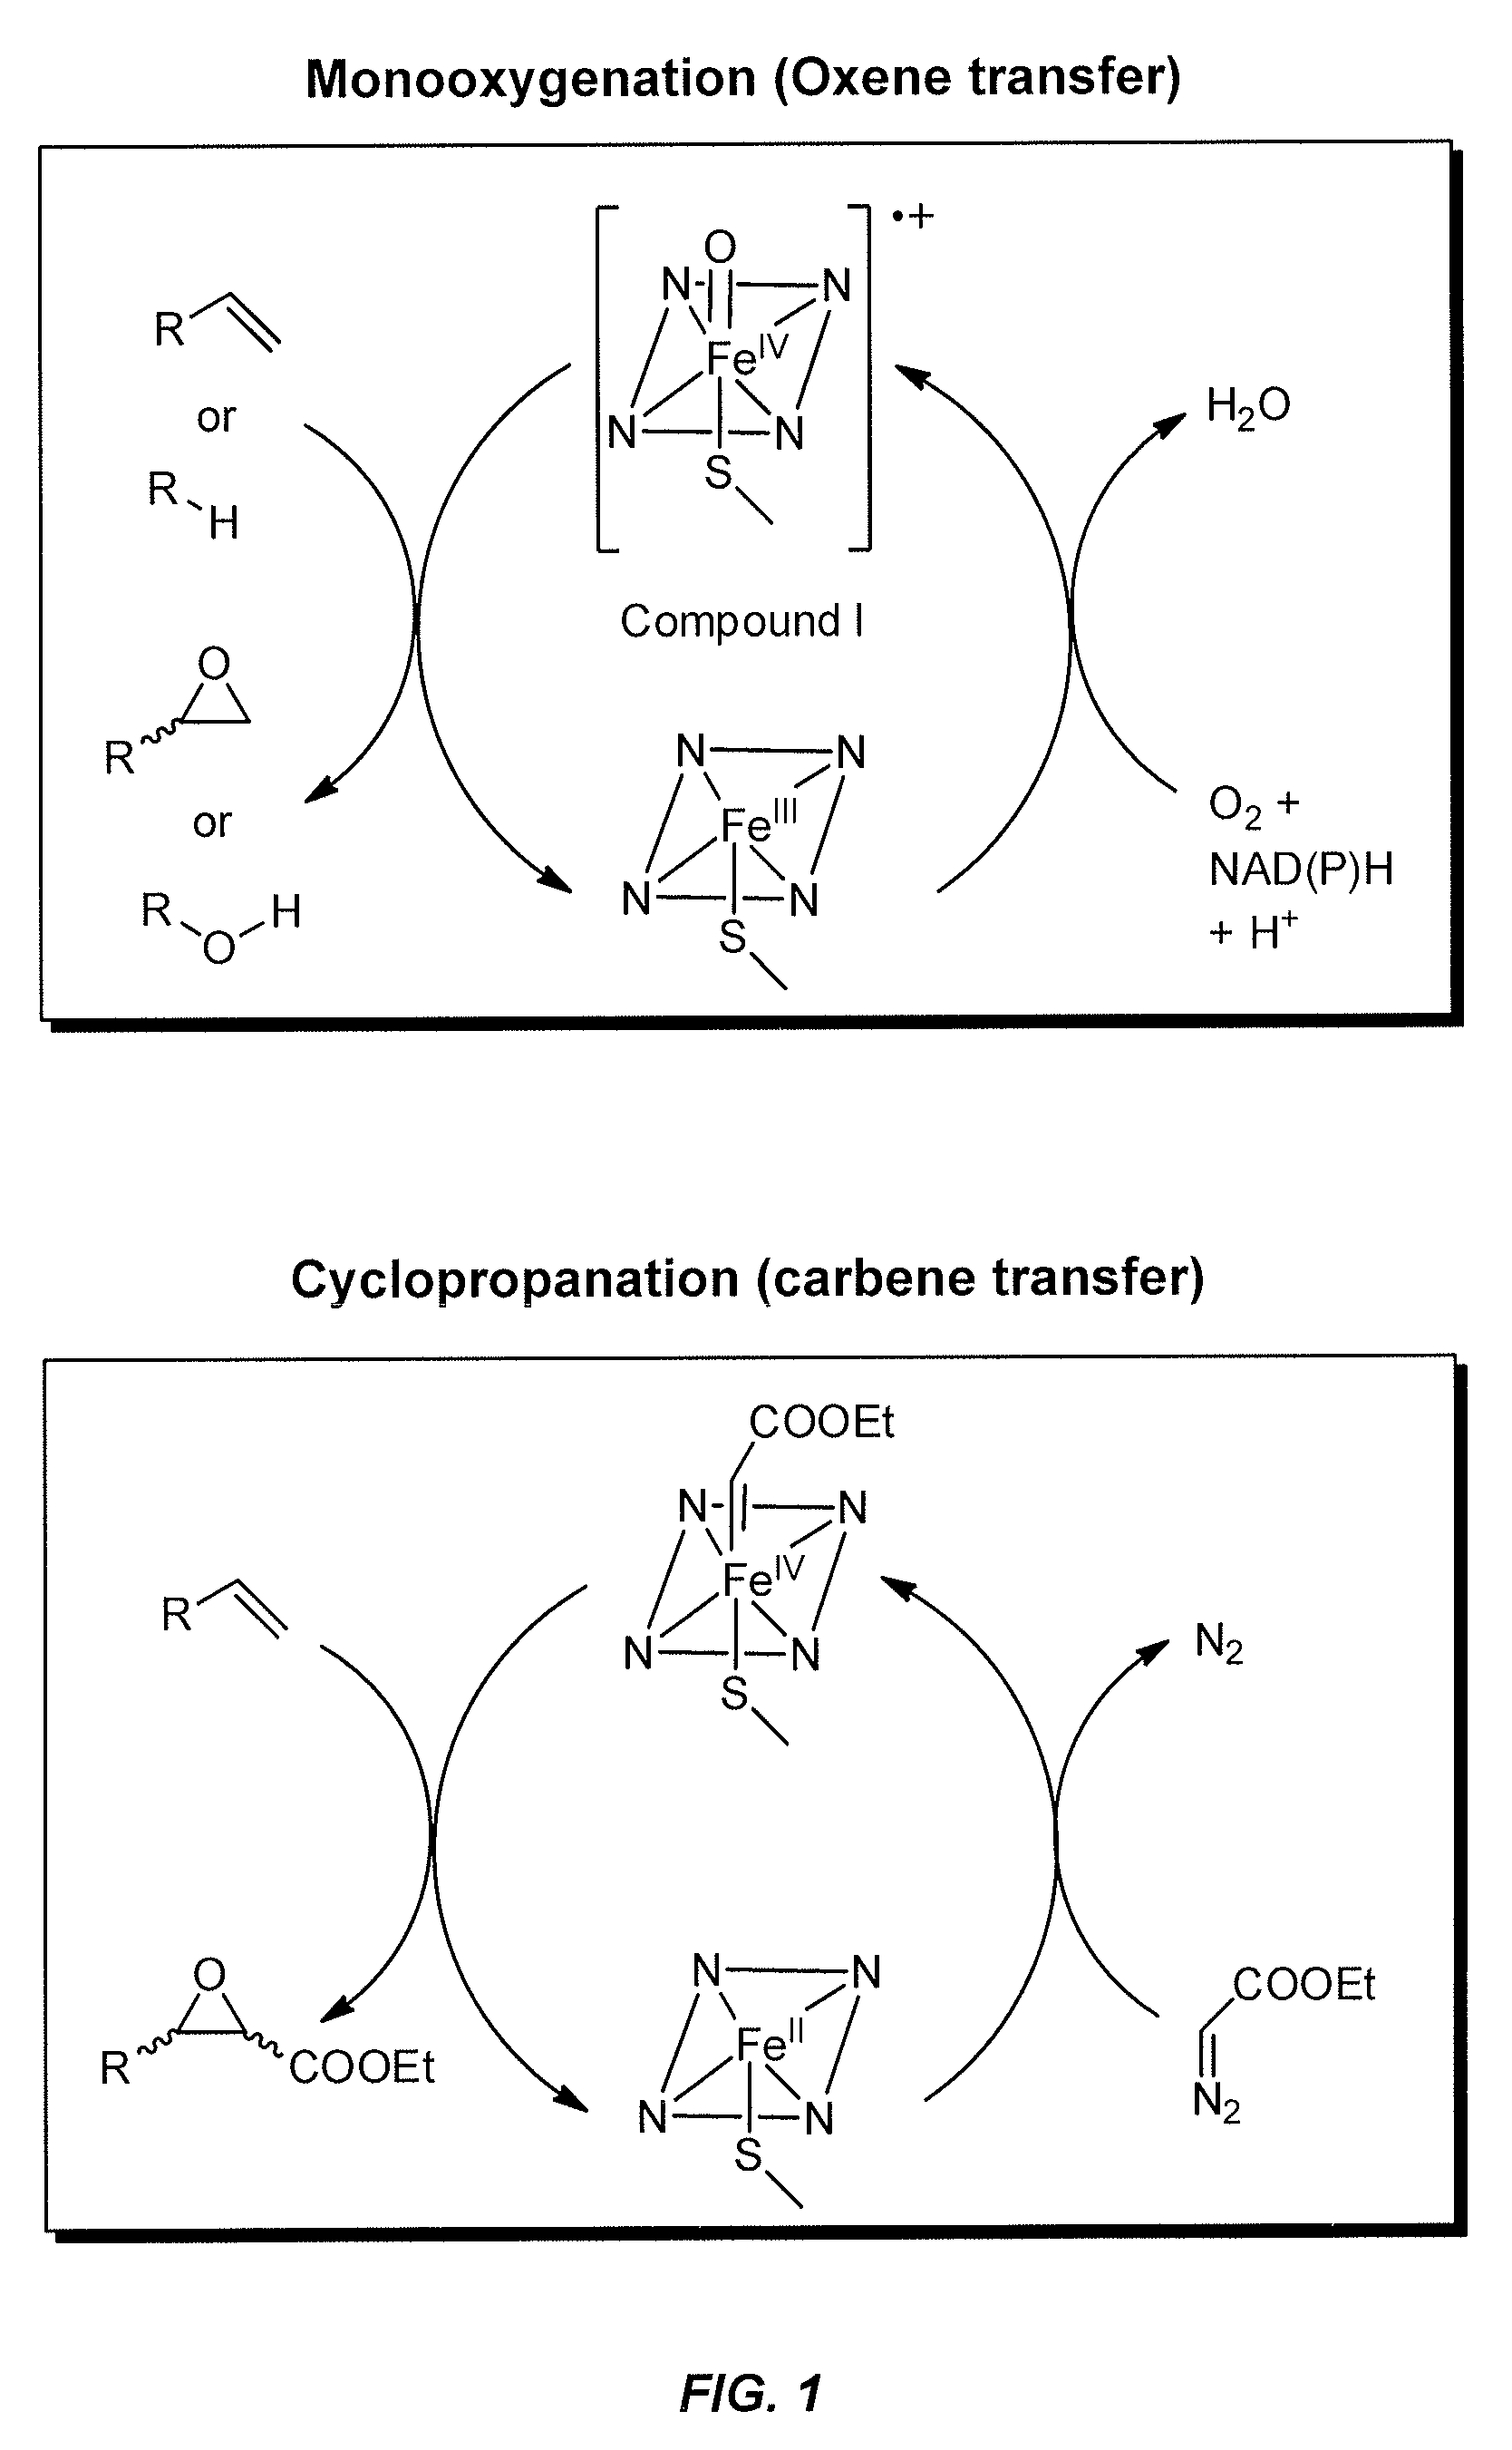 In vivo and in vitro olefin cyclopropanation catalyzed by heme enzymes